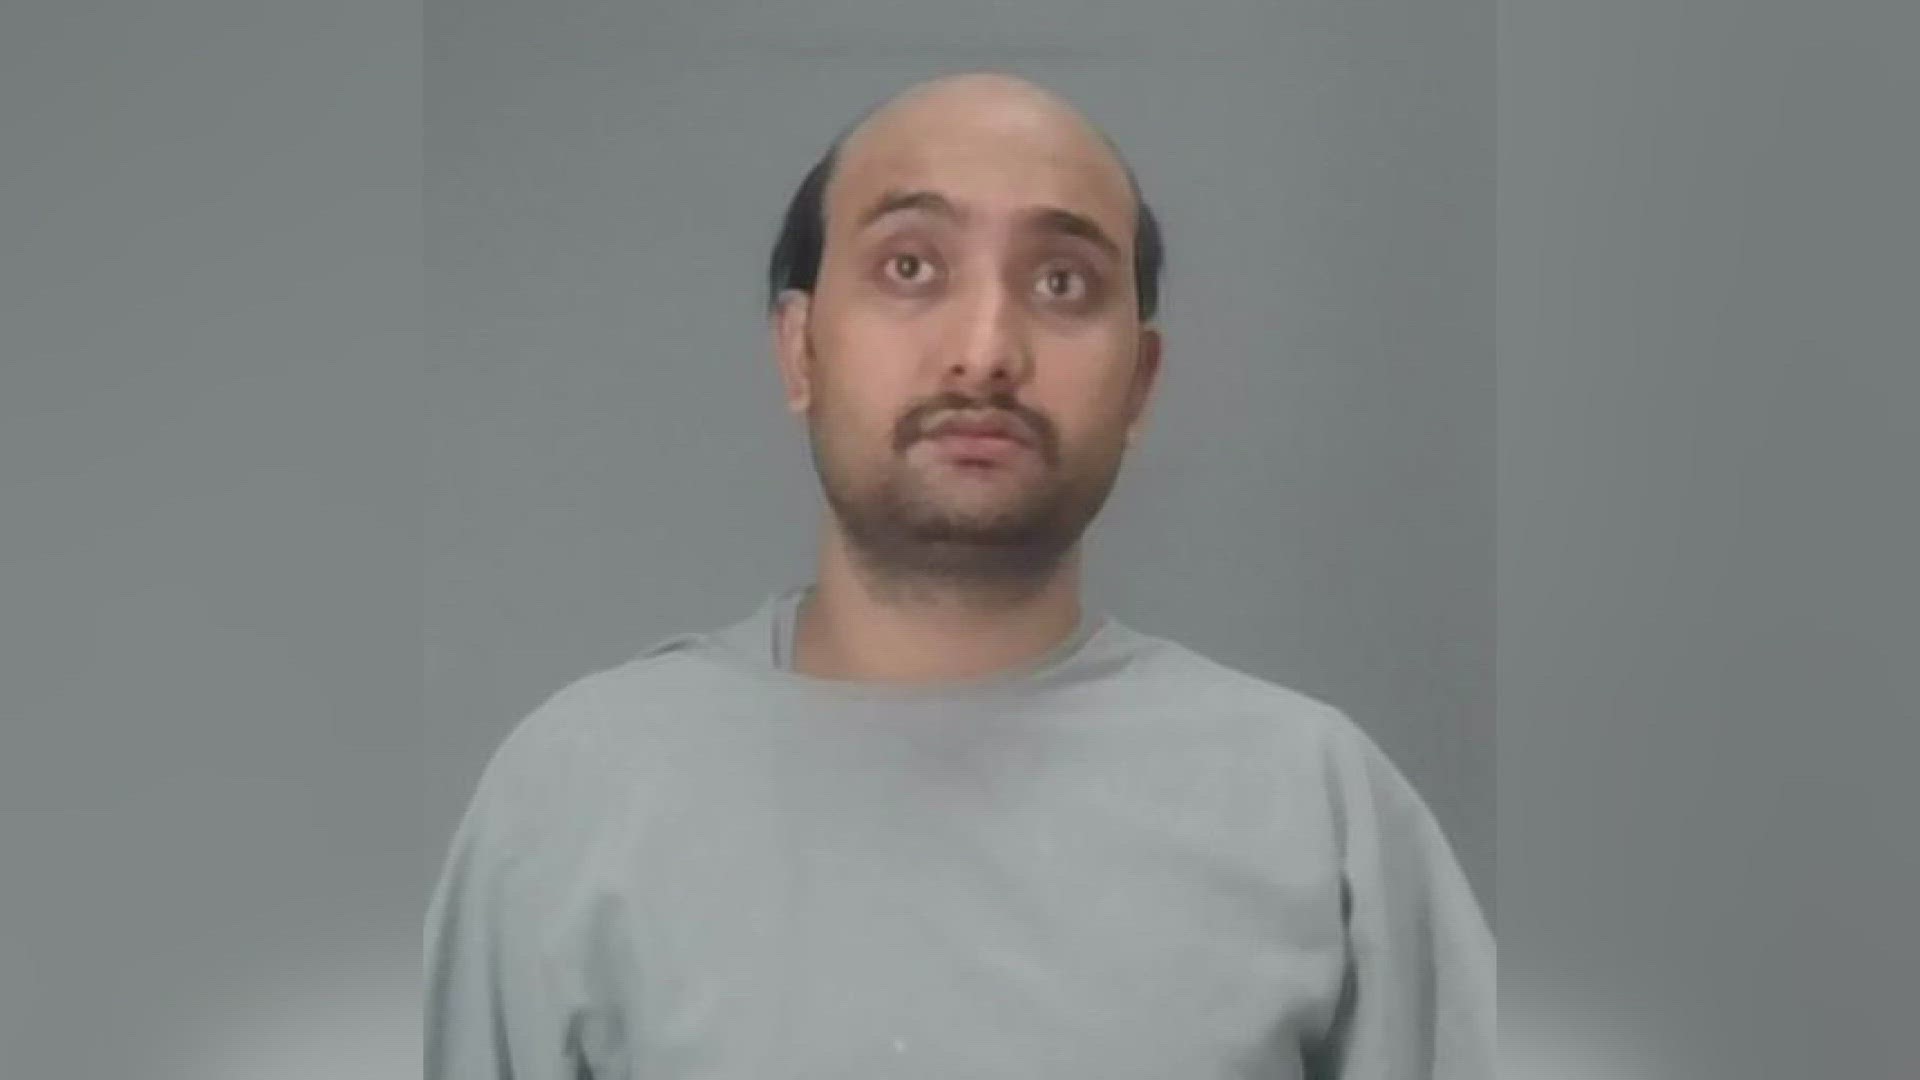 James Rimal of Cuyahoga Falls is facing several charges connected to the death of Chandra Maya Poudel-Rimal.